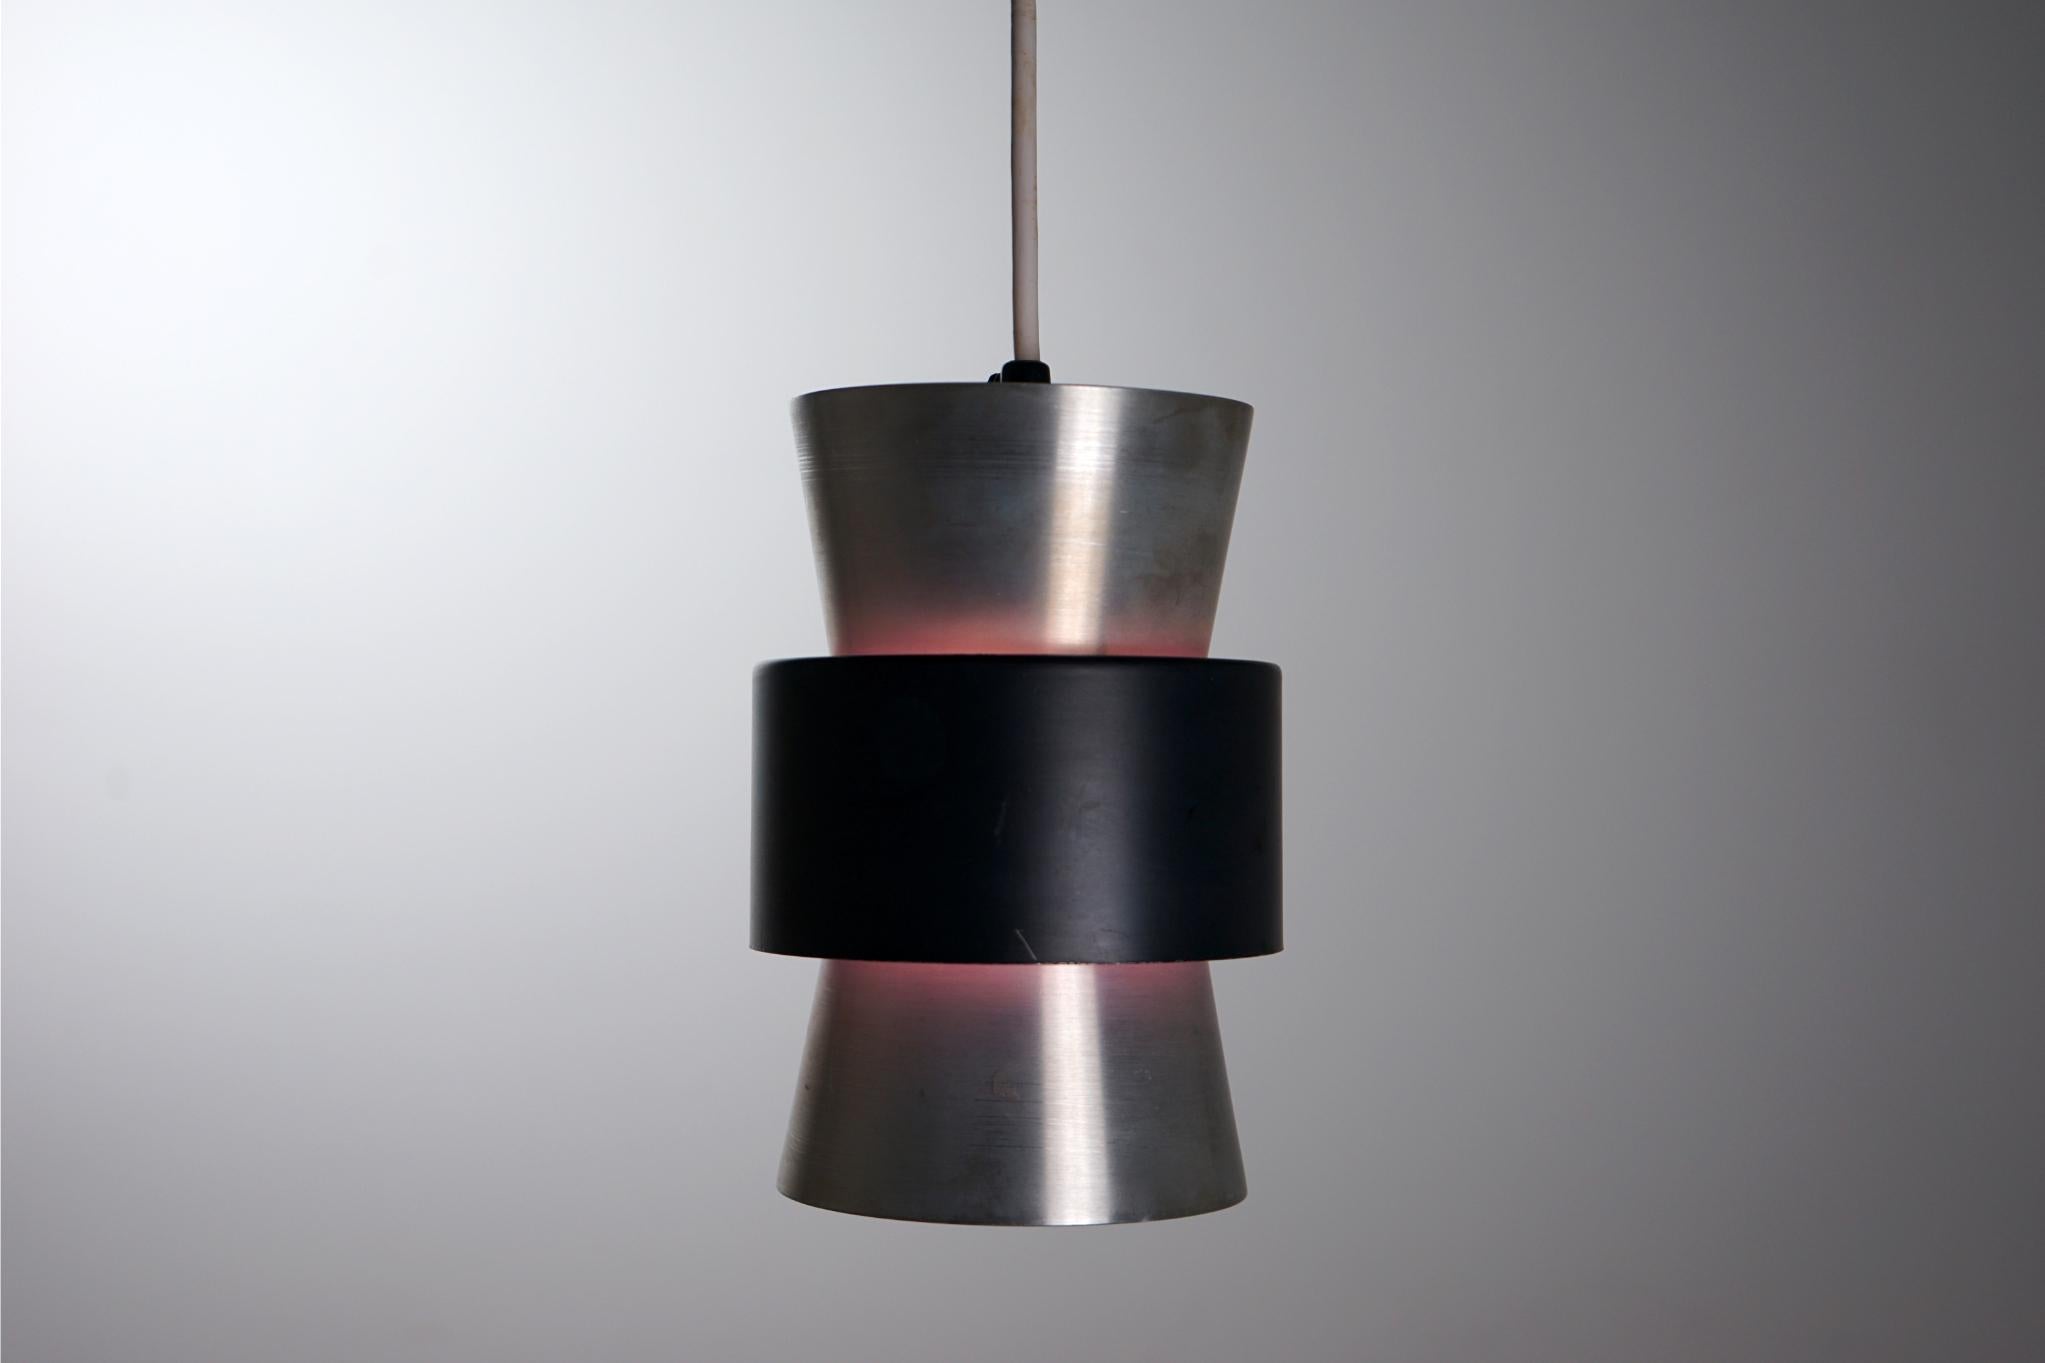 Aluminum Danish pendant light, circa 1960's. Compact design makes it the perfect addition to any corner of the home. Geometric lines with contrasting black middle band painted on inside to reflect violet when lit. In original condition, sold